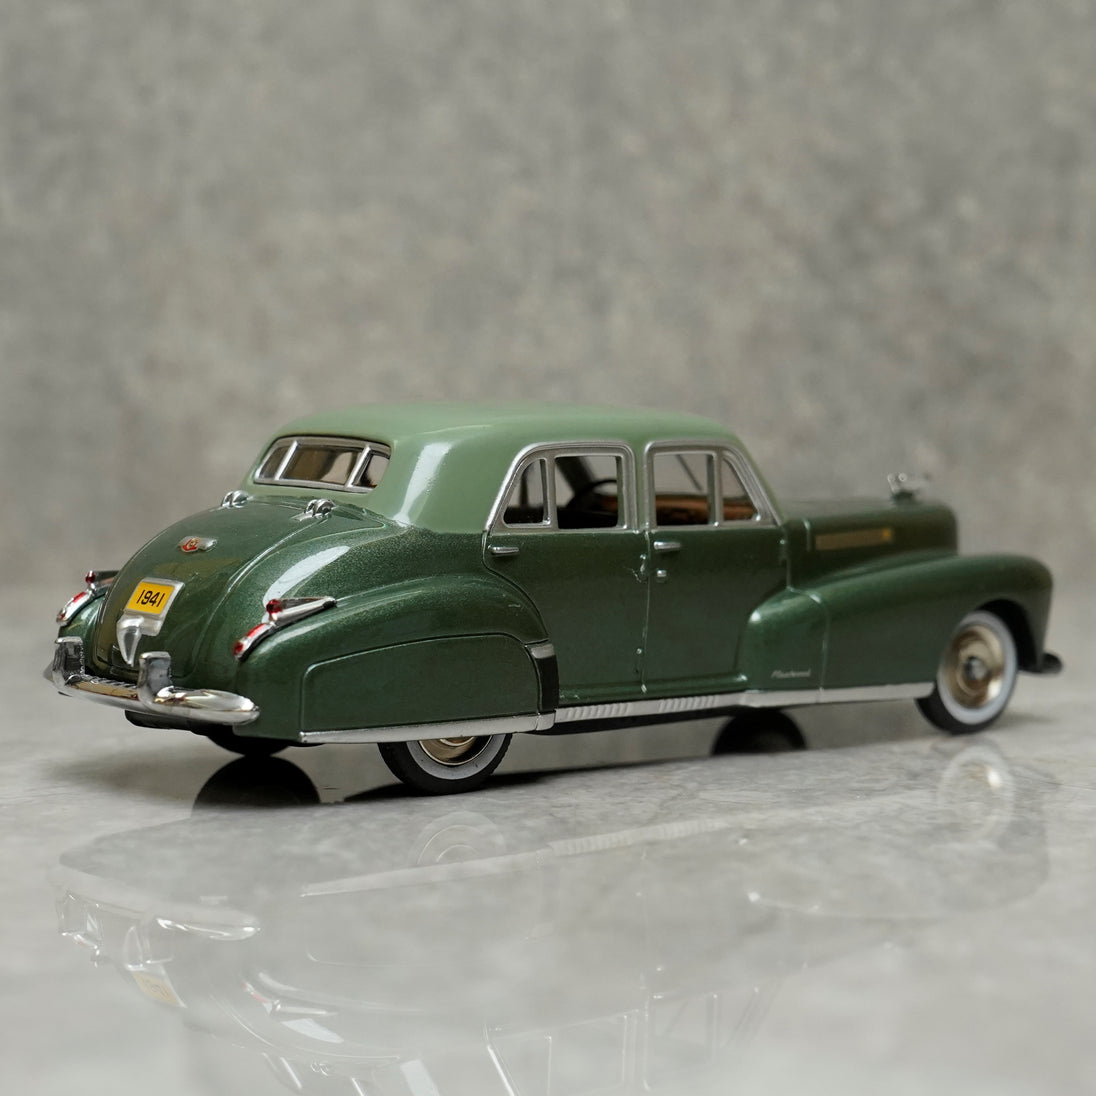 1941 Cadillac Fleetwood Series Sixty Special Alloy Diecast Car Model 1:43 By GFCC